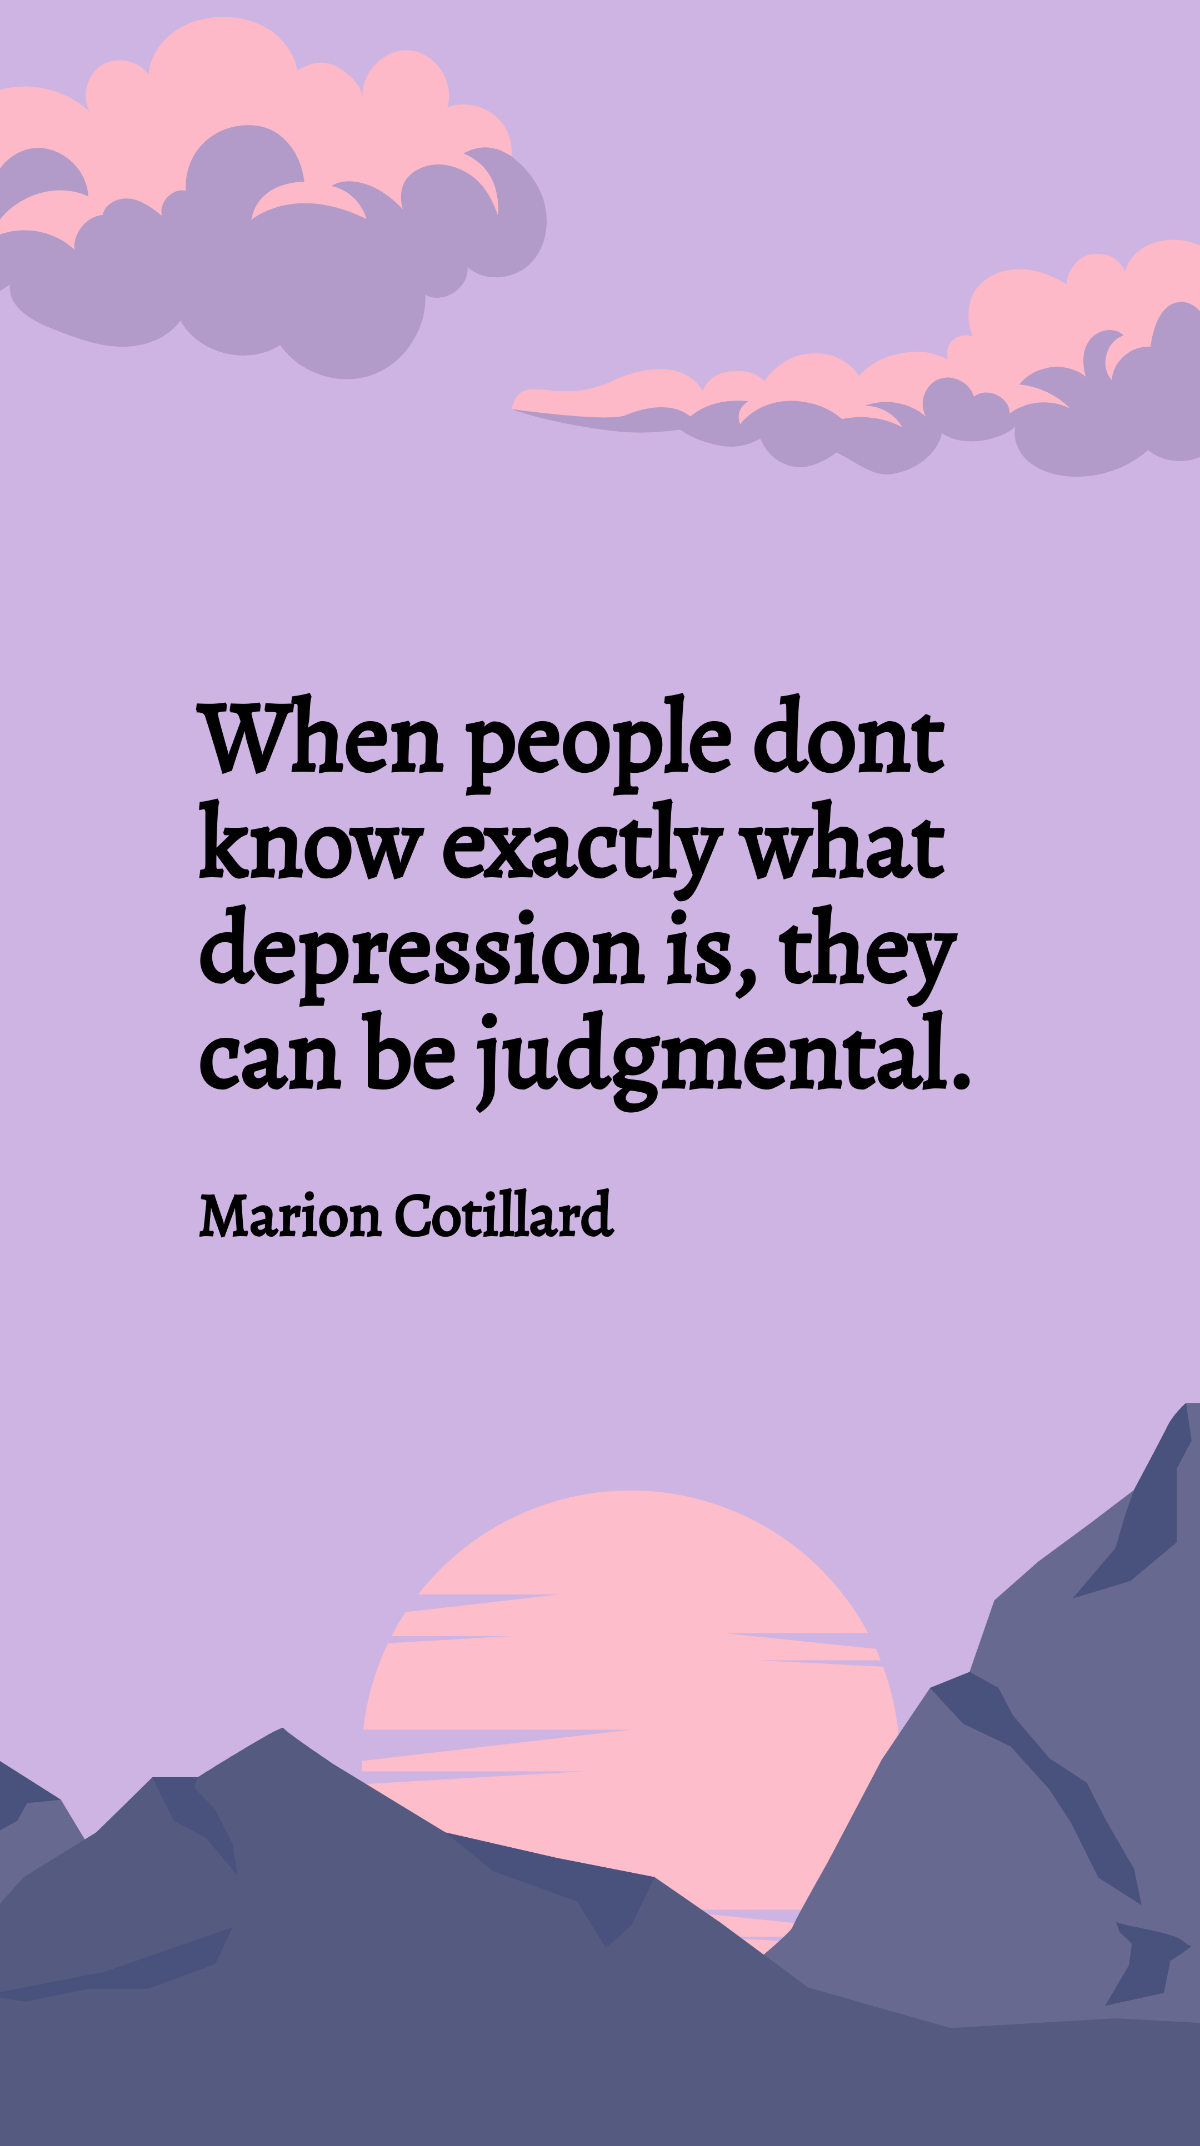 Marion Cotillard - When people dont know exactly what depression is, they can be judgmental. Template